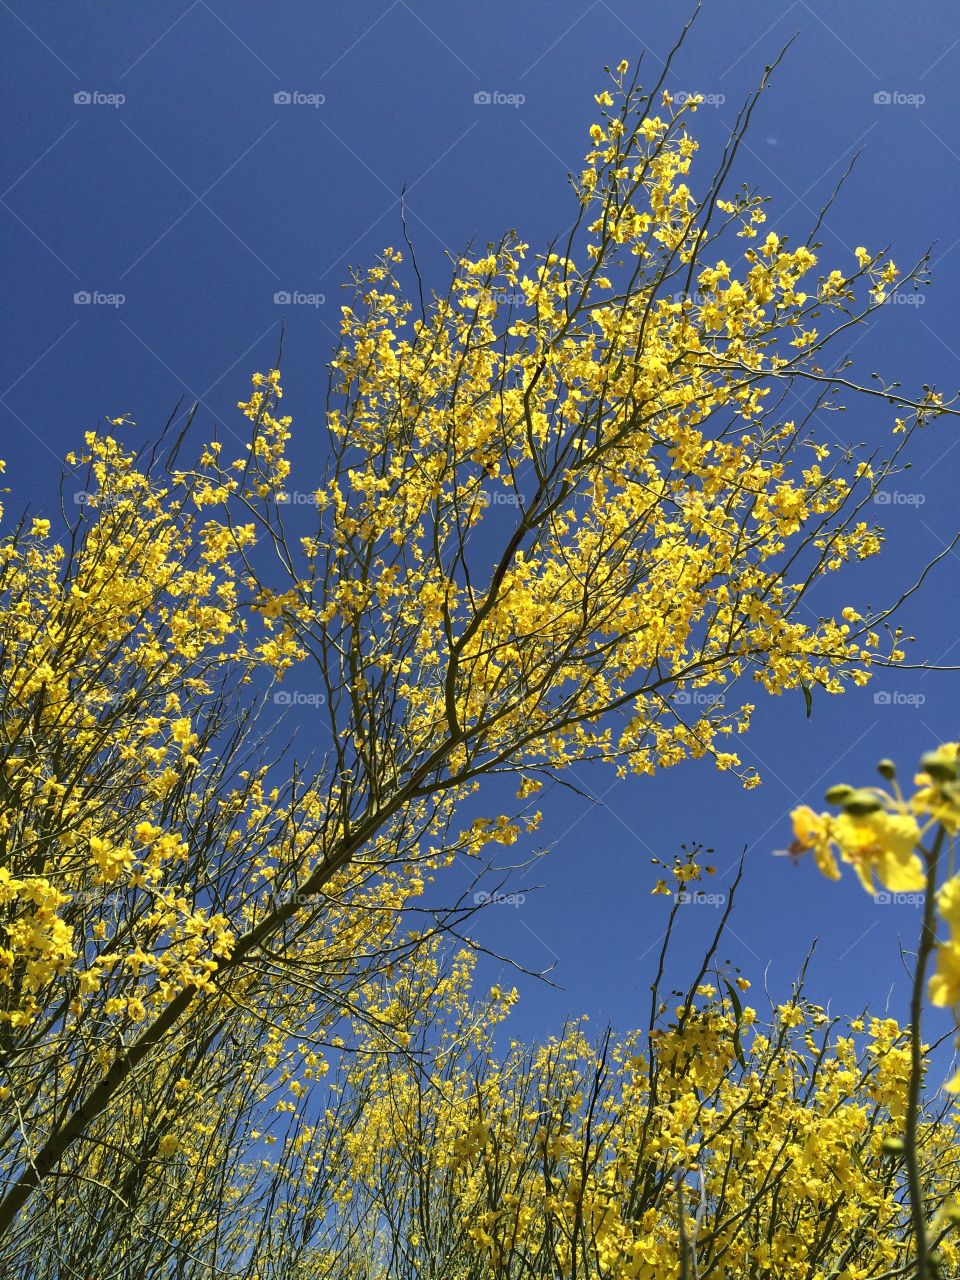 Spring bloom. Blooming yellow flowers on trees ready for spring 